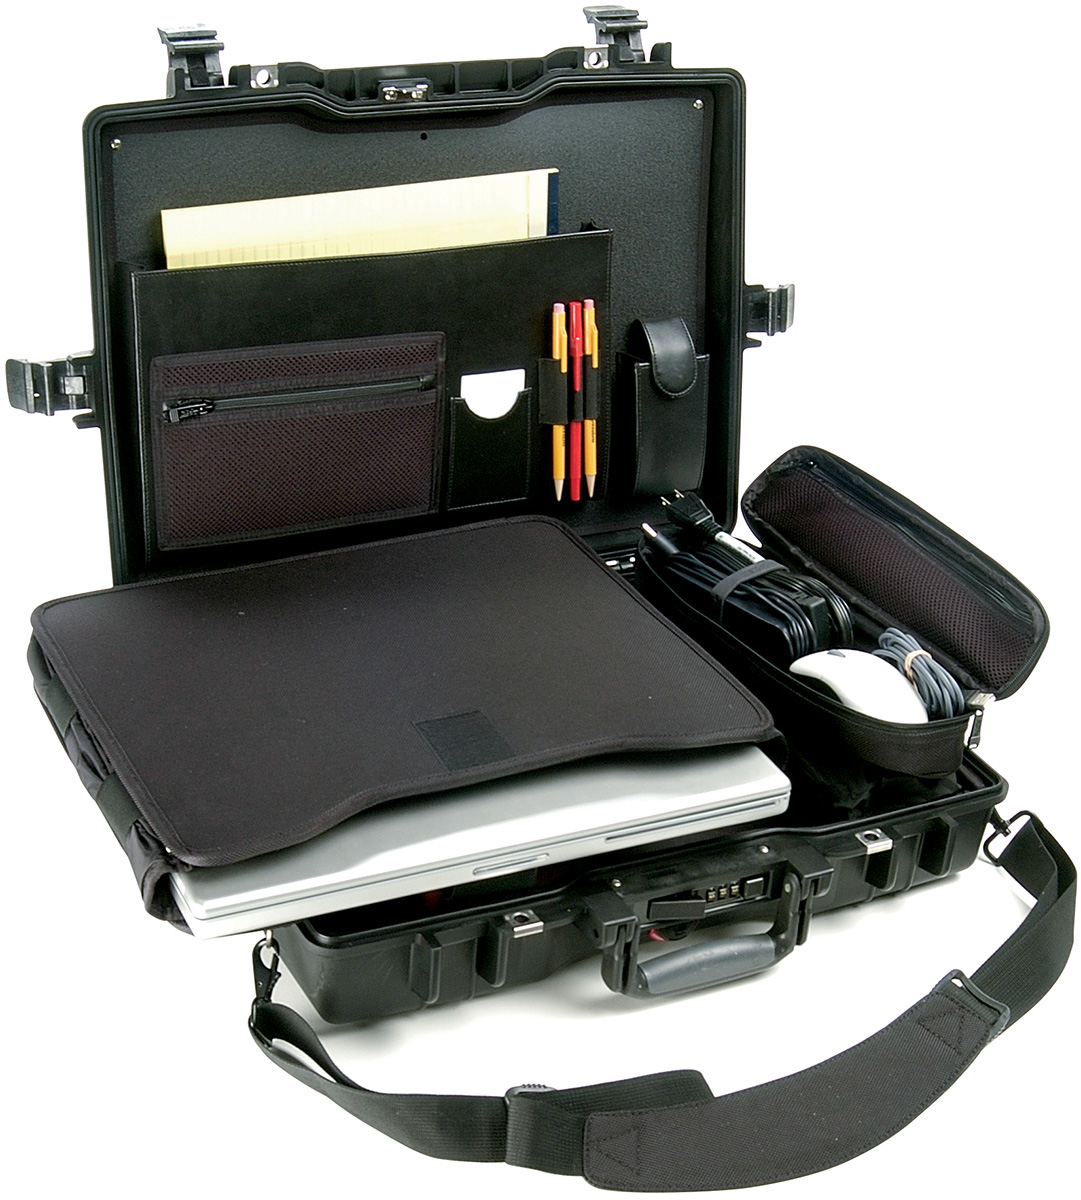 1495cc1-pelican-deluxe-17-in-laptop-case-midwest-case-company